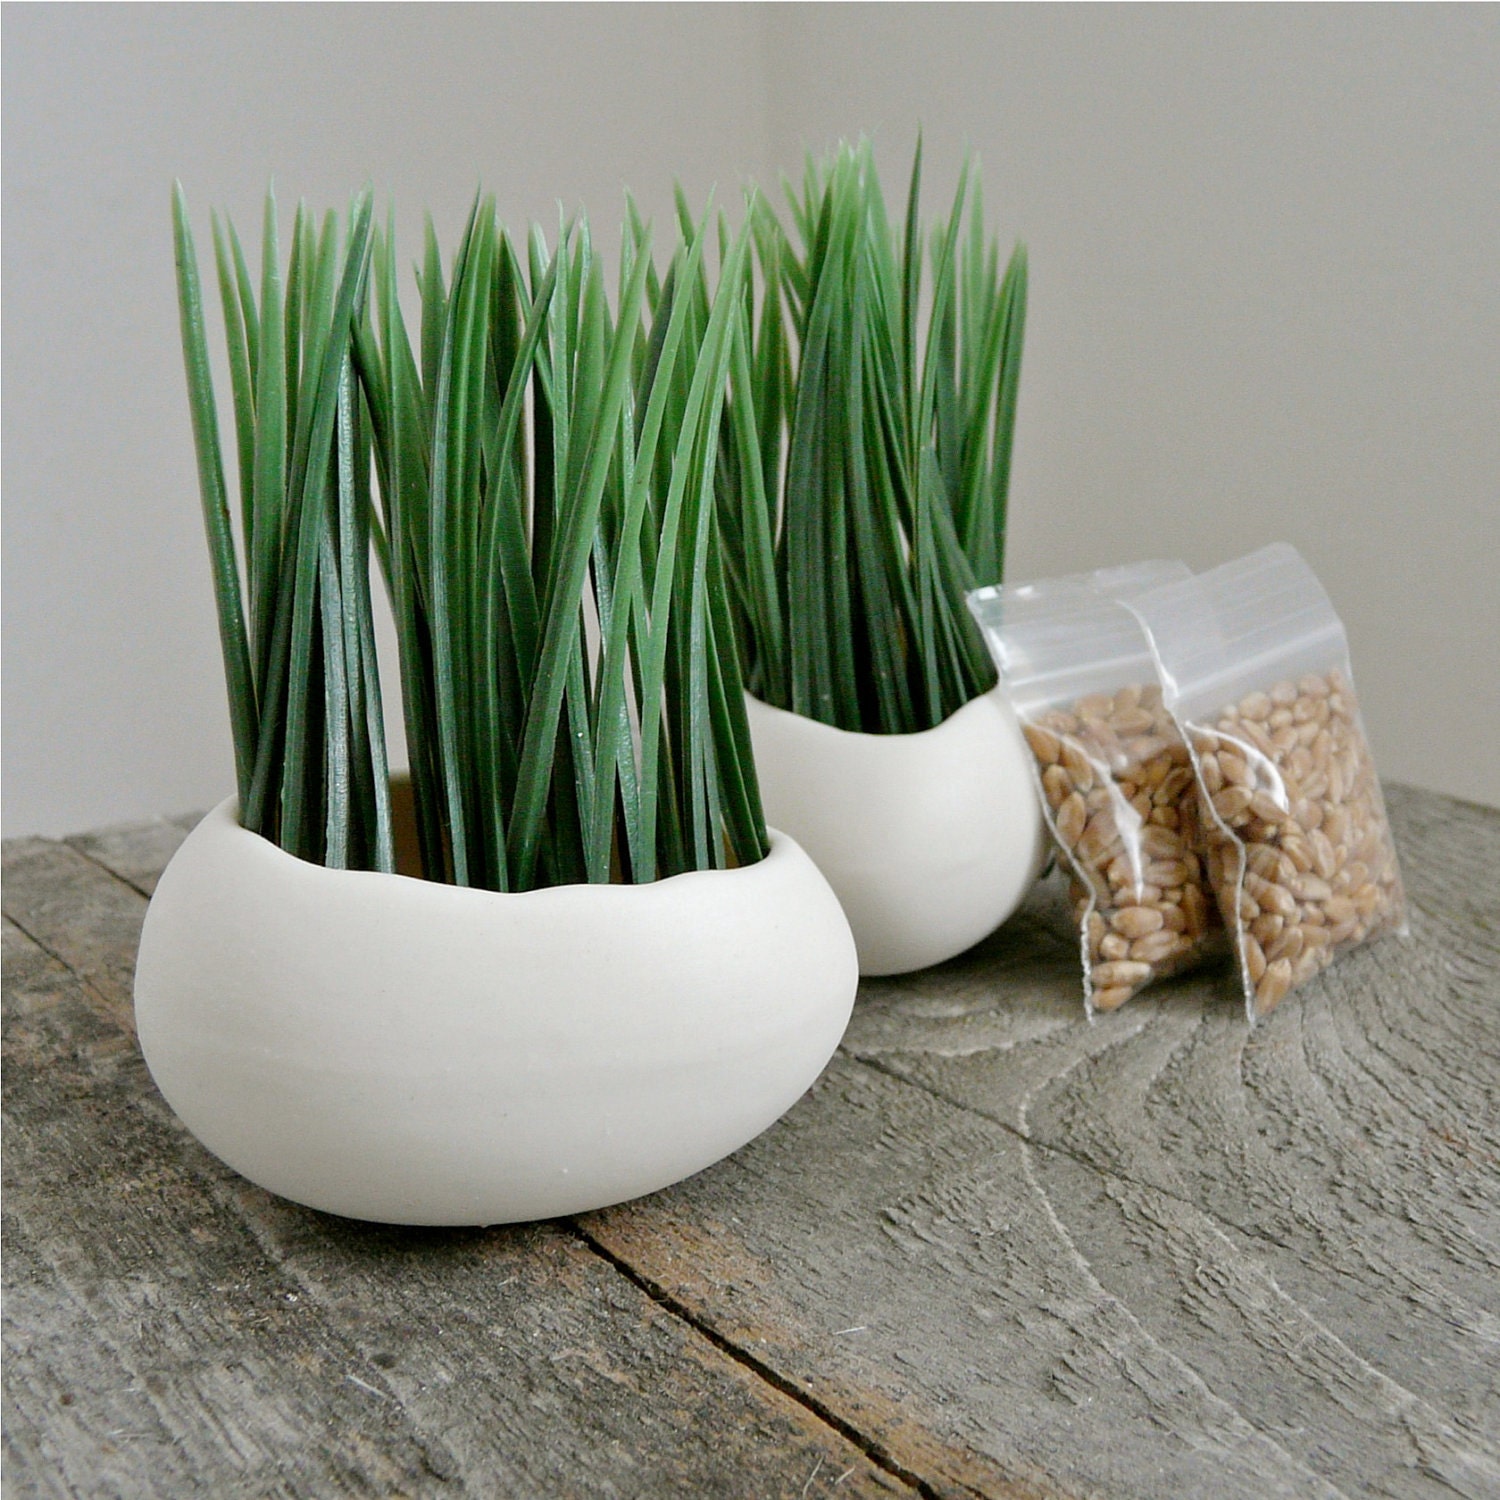 Porcelain Egg Planters, Egg Sprouts Set of 2, Wheat Grass Kit - RevisionsDesign